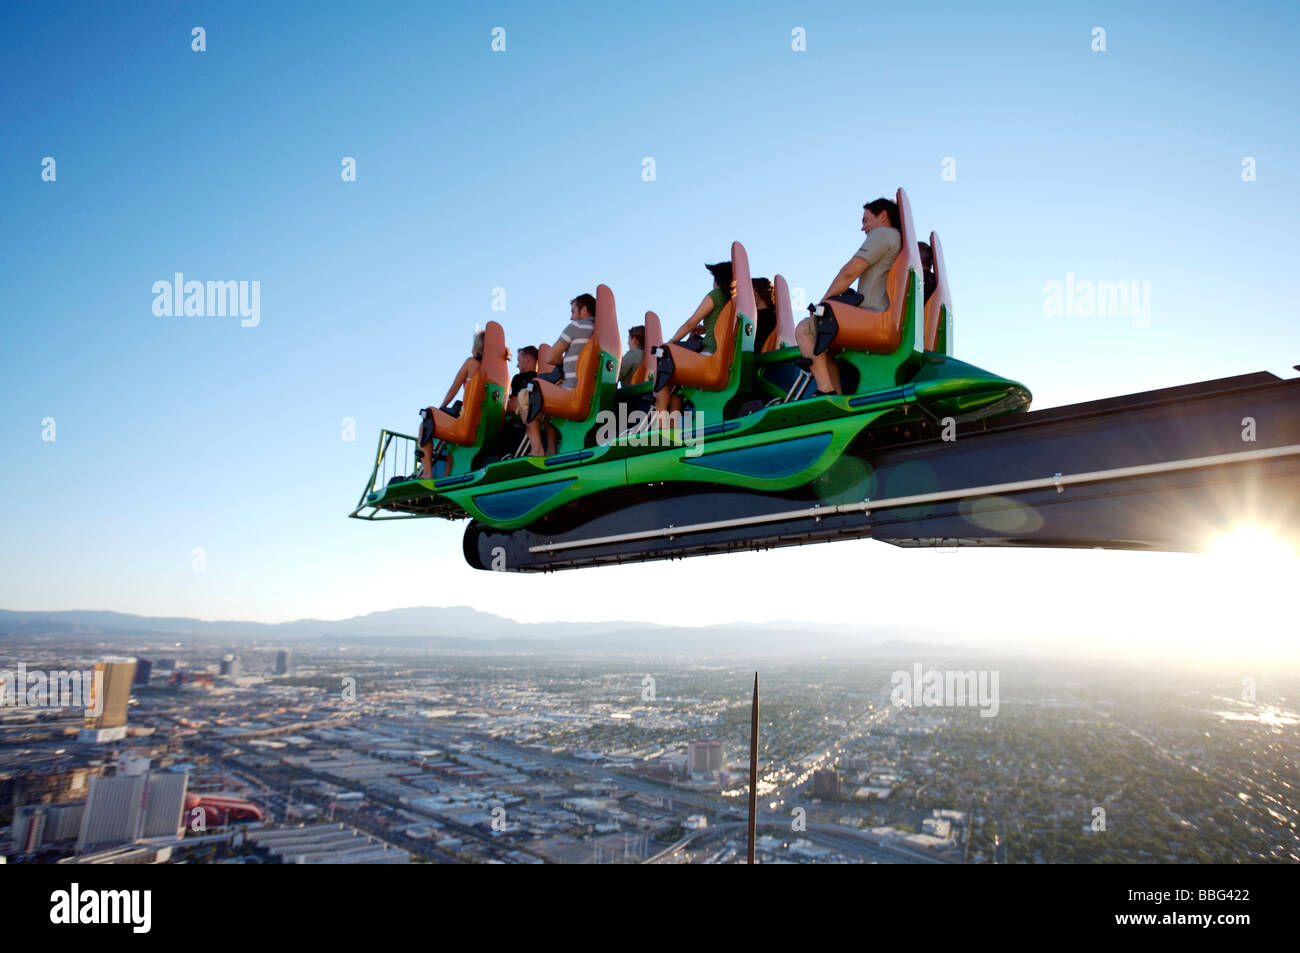 Carnival Ride Archives - Big Shot Stratosphere in Las Vegas, Nevada Big Shot  is a pneumatically powered tower ride. It was at one time the world's  highest amusement ride in terms of